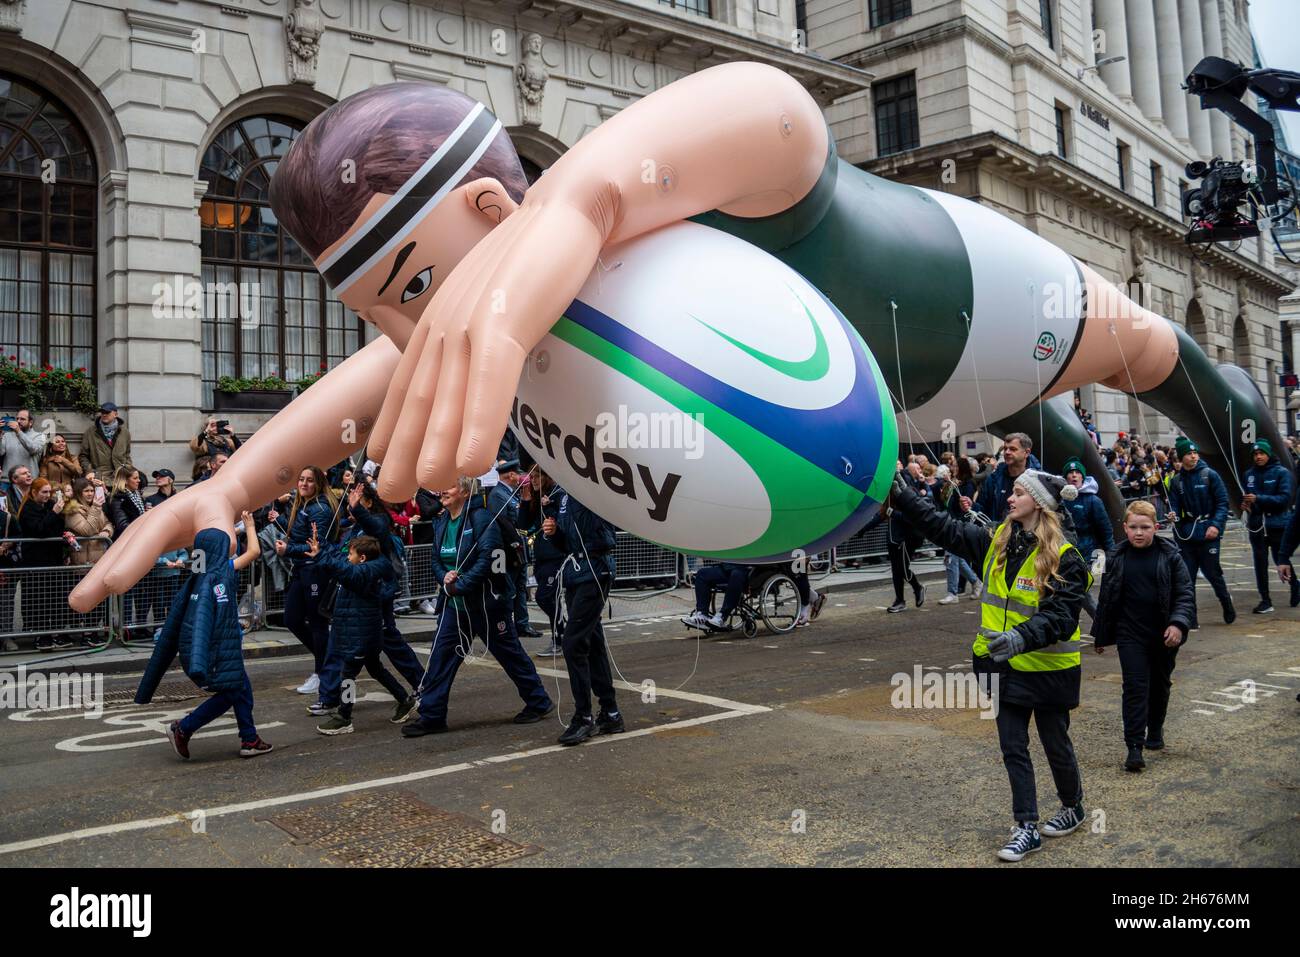 POWERDAY, LONDON IRISH RUGBY CLUB float at the Lord Mayor's Show, Parade, procession passing along Poultry, near Mansion House, London, UK Stock Photo